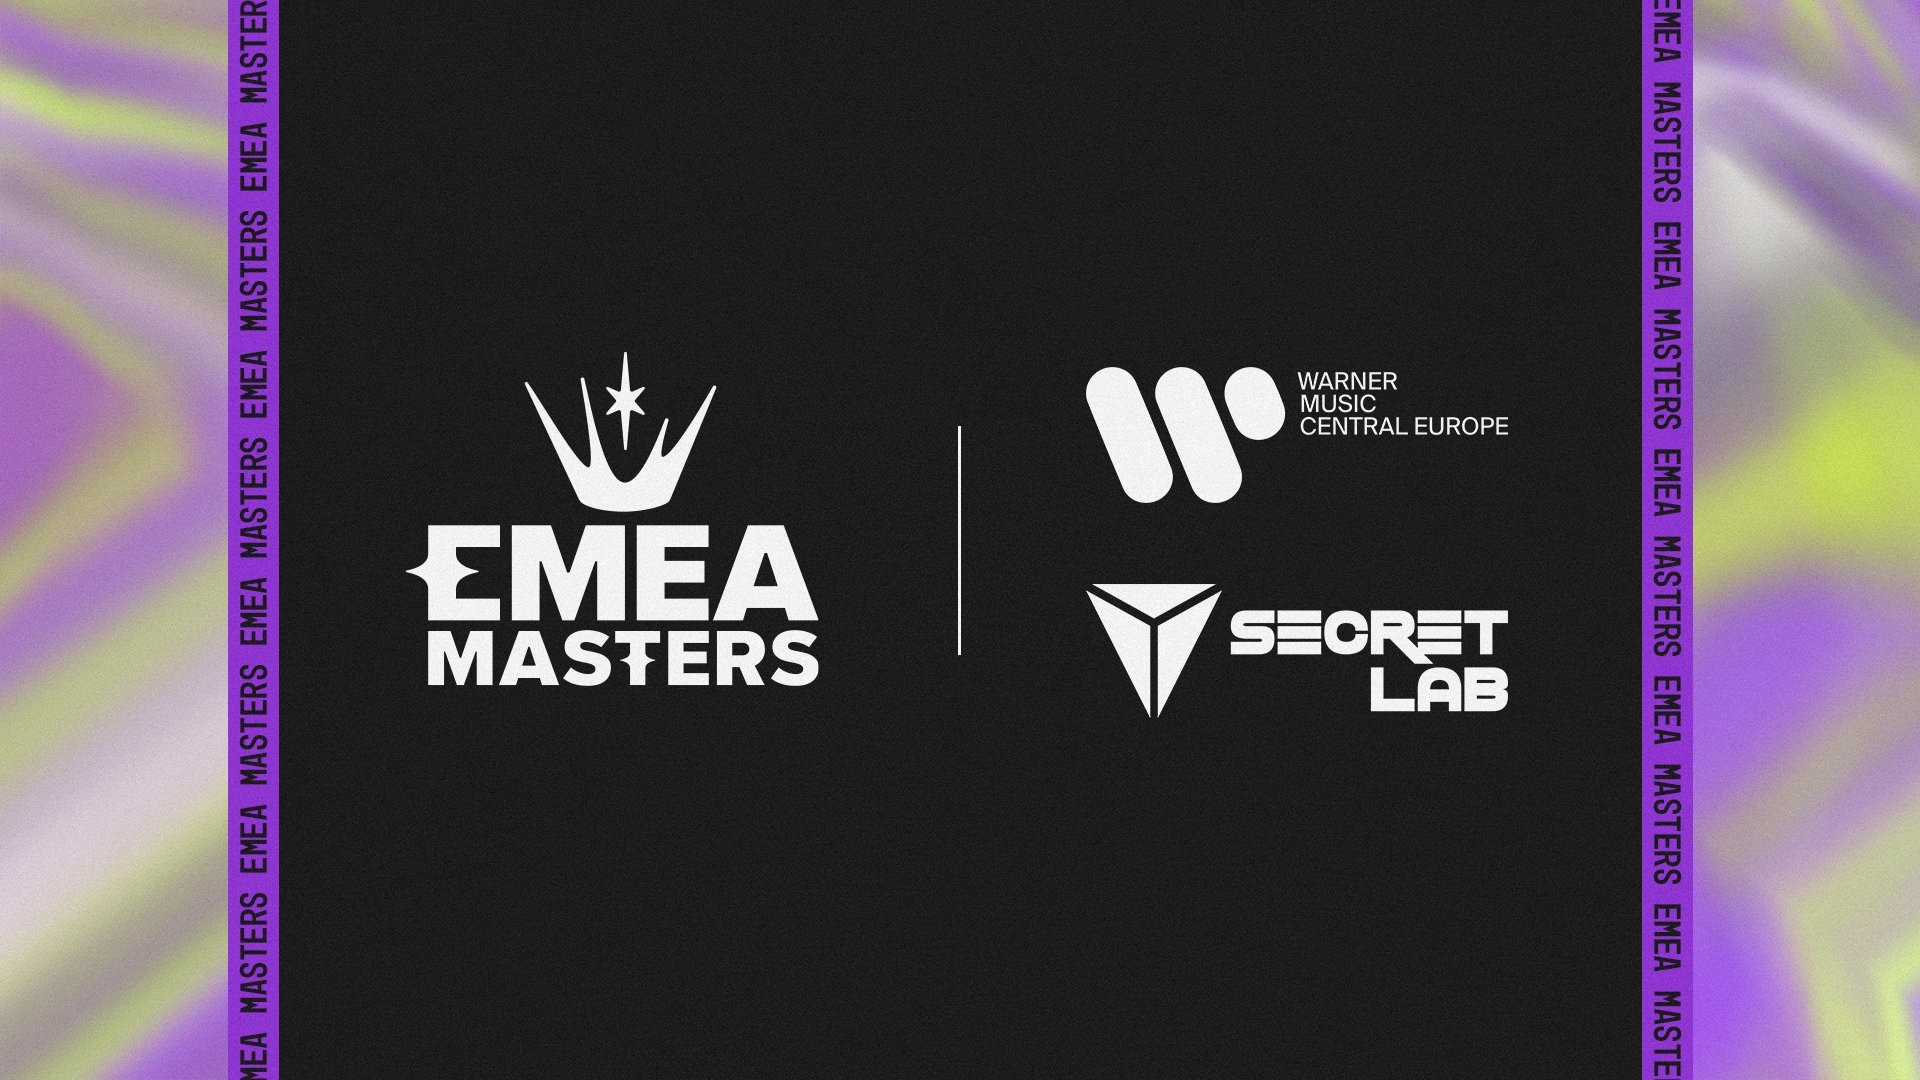 Riot Games partnerships for the EMEA Masters